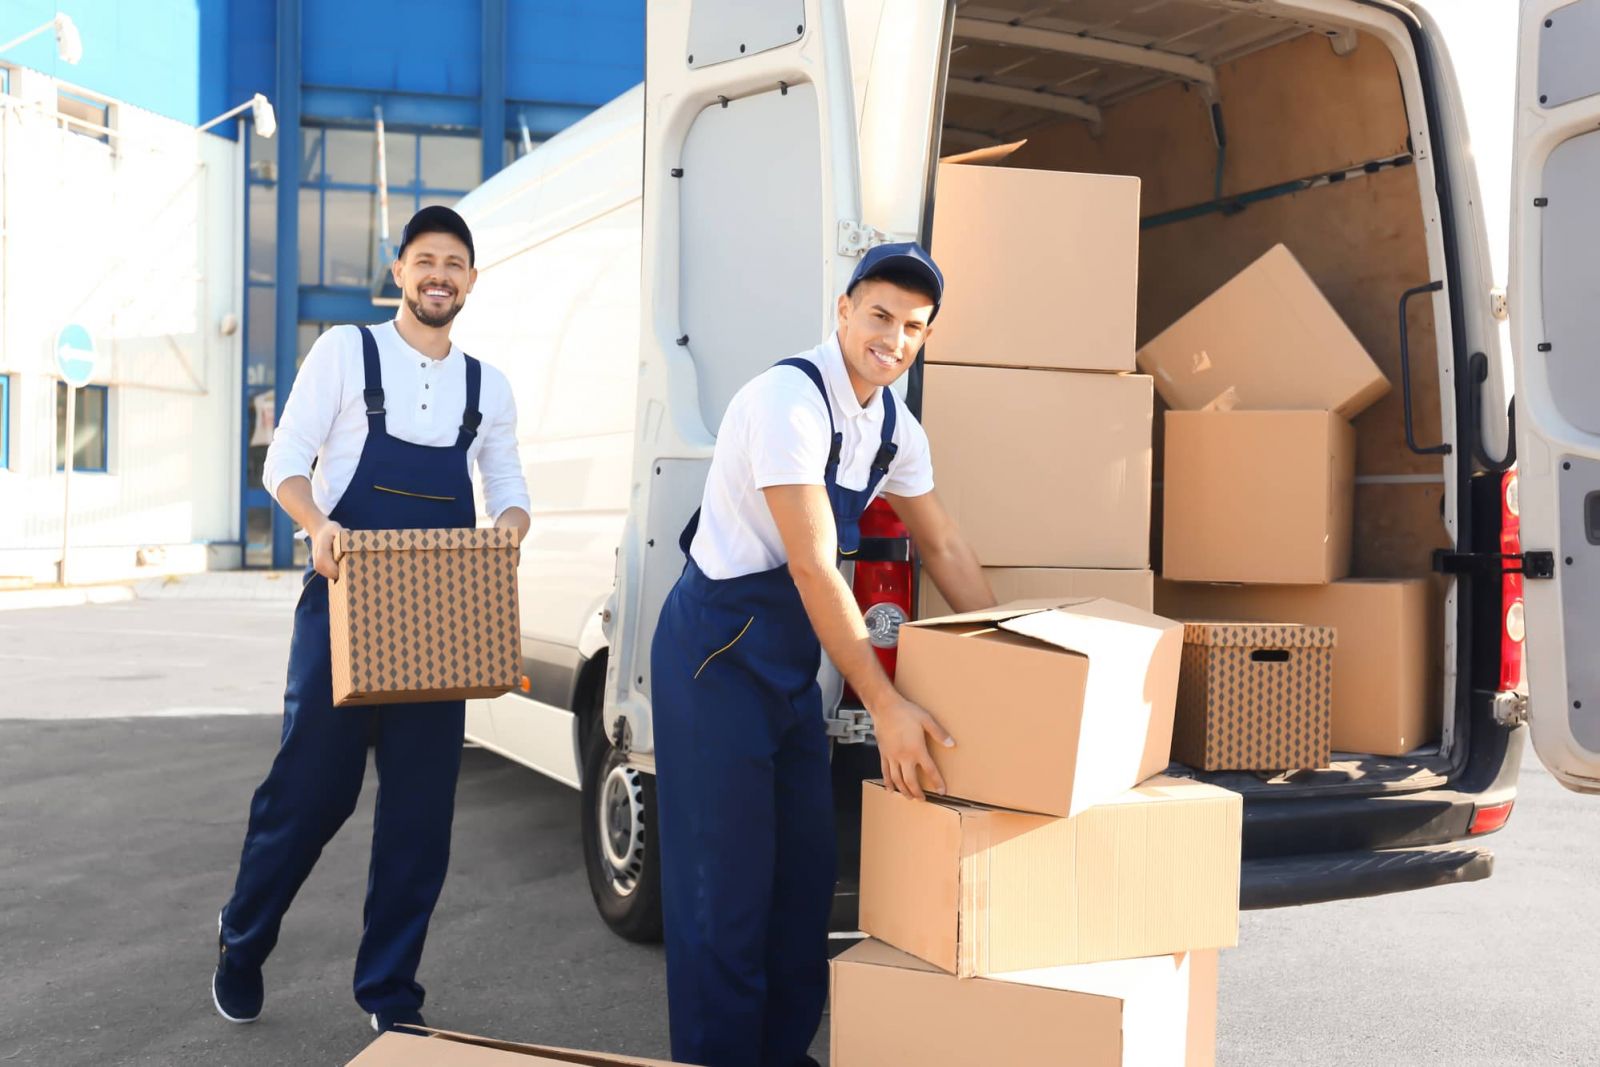 Top 10 Removalists in Inner West Sydney - 2023